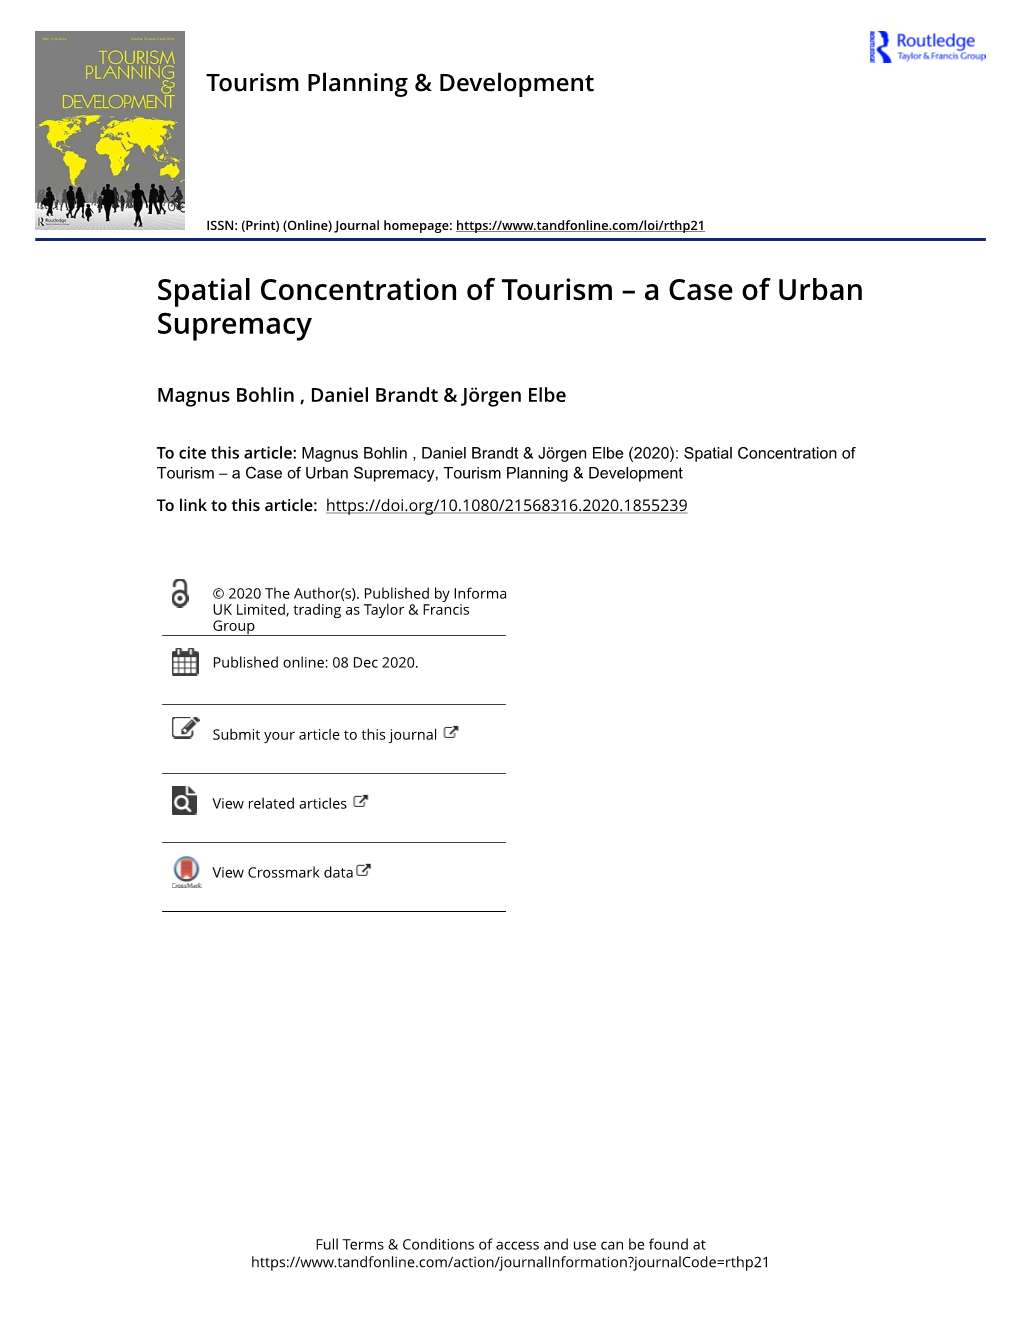 Spatial Concentration of Tourism – a Case of Urban Supremacy